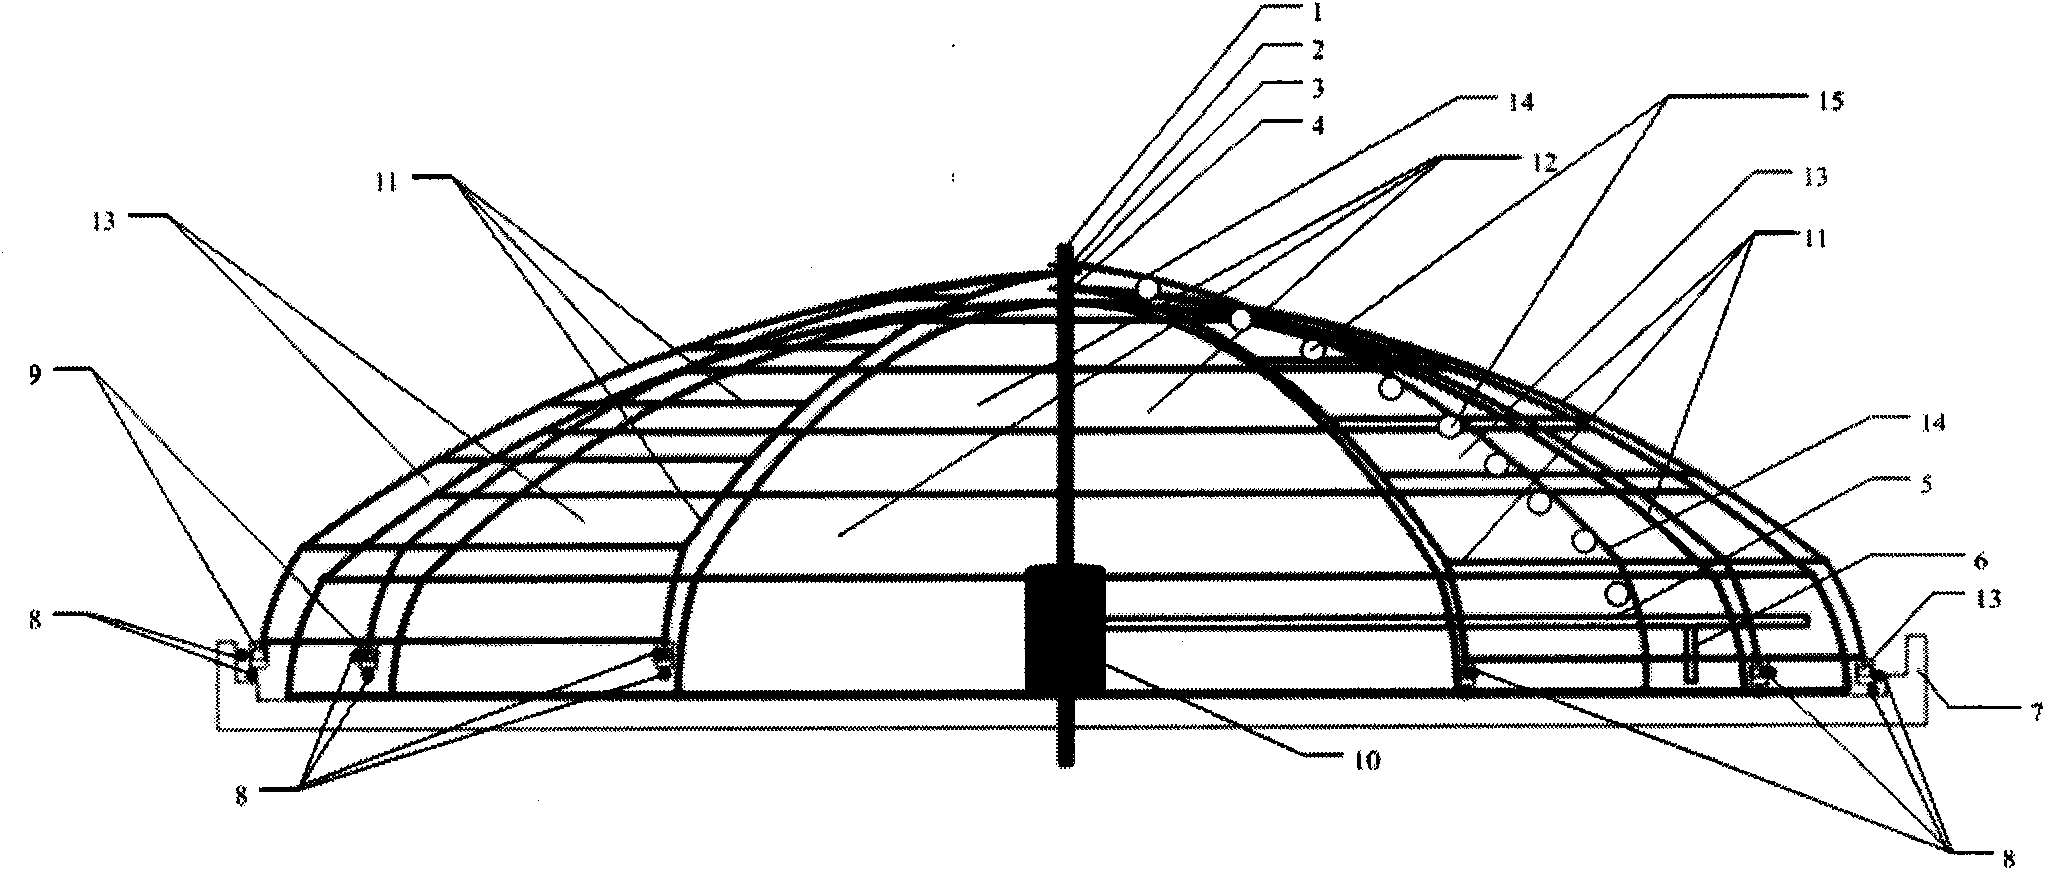 All-weather and full-automatic multi-layer temperature-control circular greenhouse